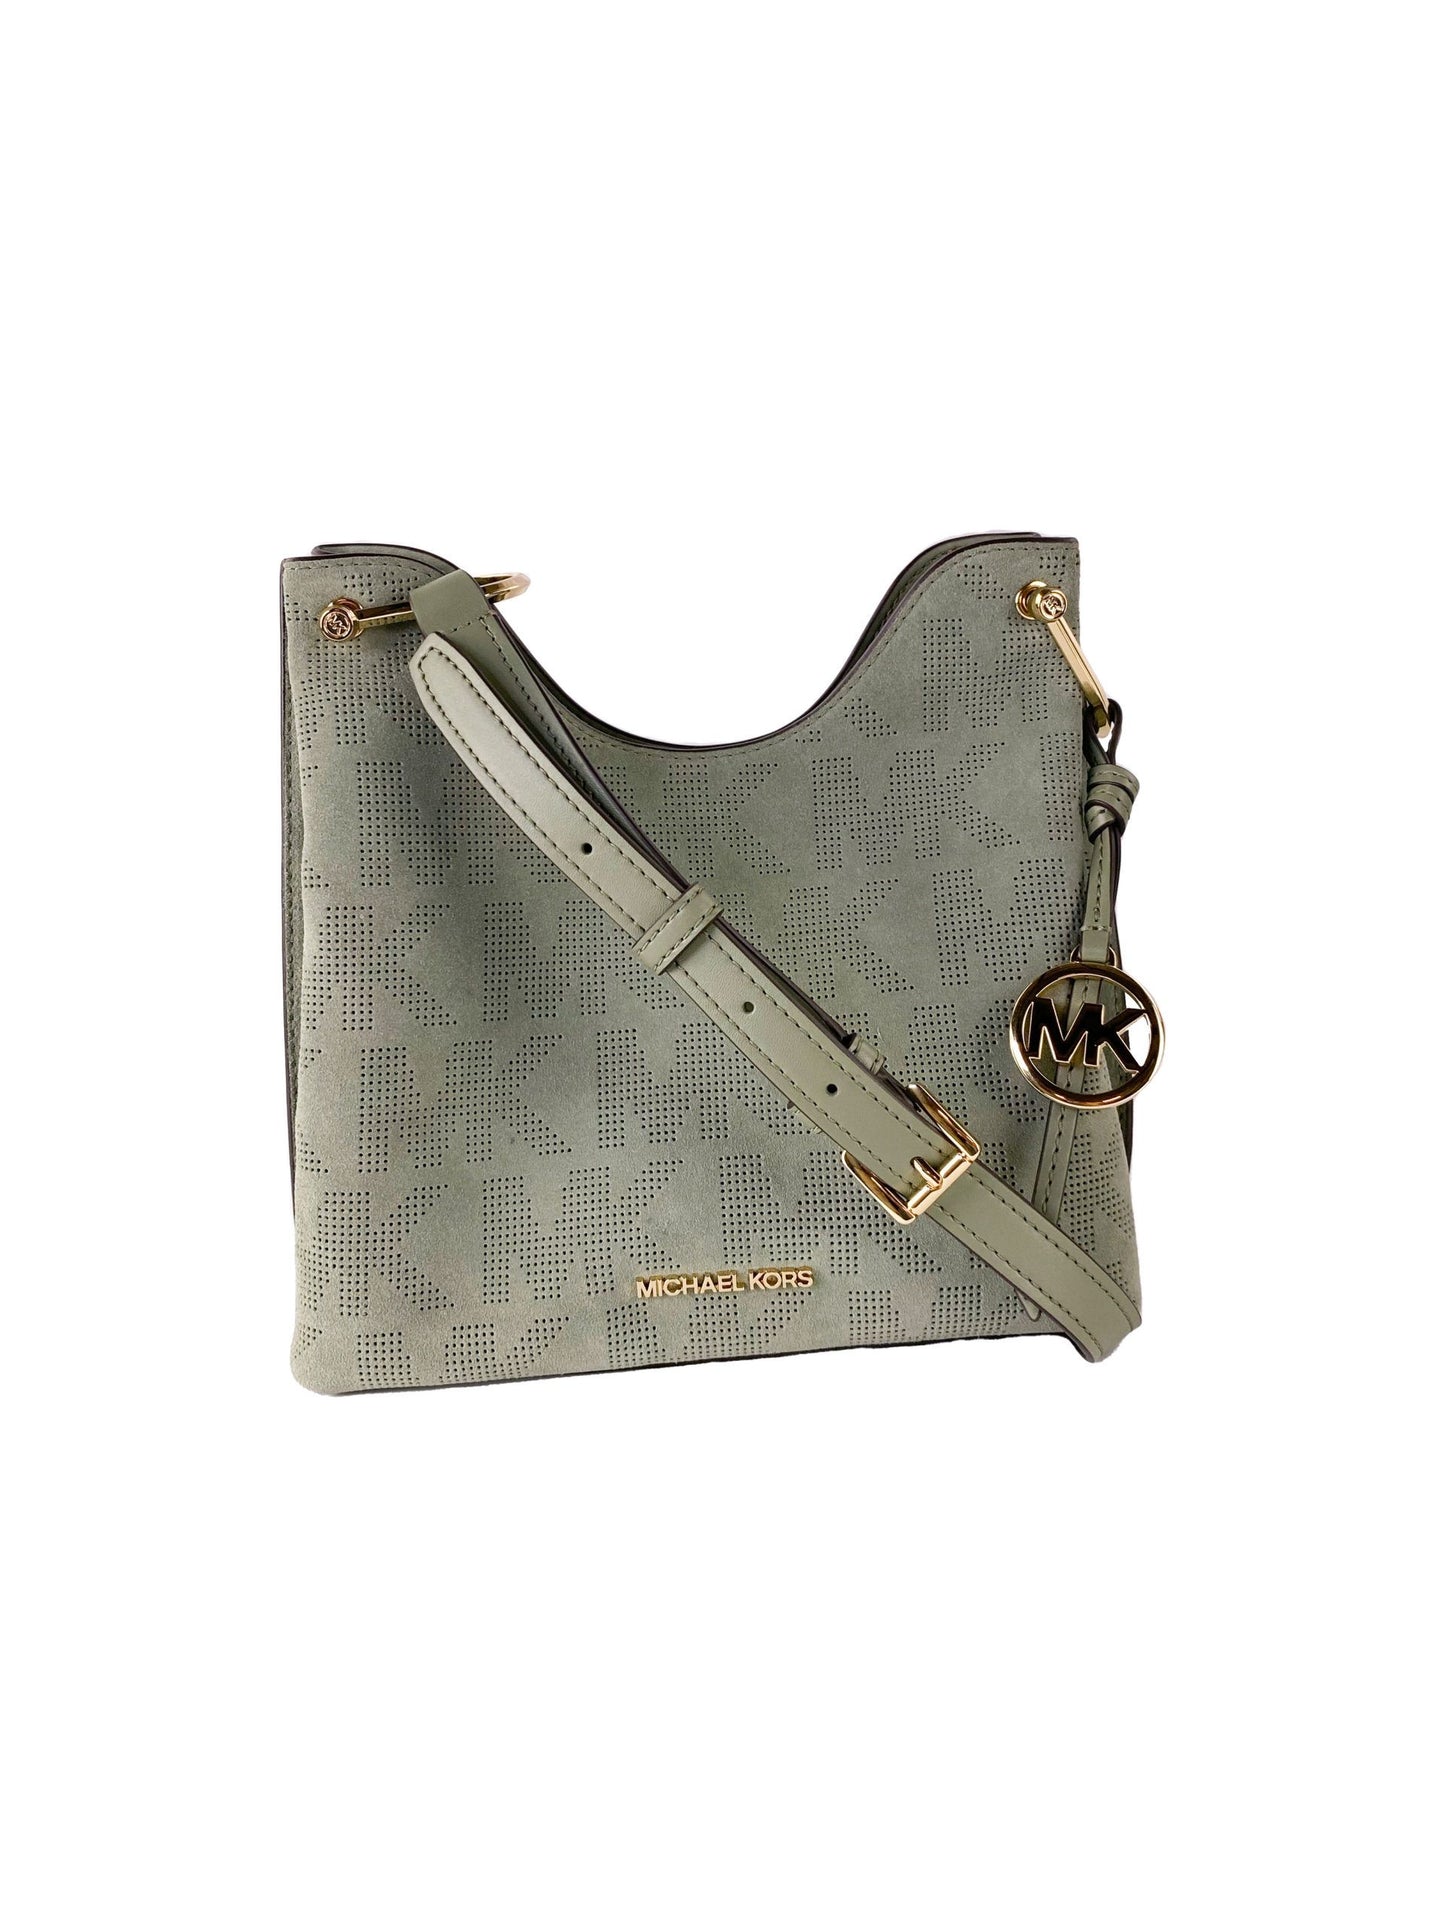 Joan Large Perforated Suede Leather Slouchy Messenger Handbag (Army Green) - Designed by Michael Kors Available to Buy at a Discounted Price on Moon Behind The Hill Online Designer Discount S